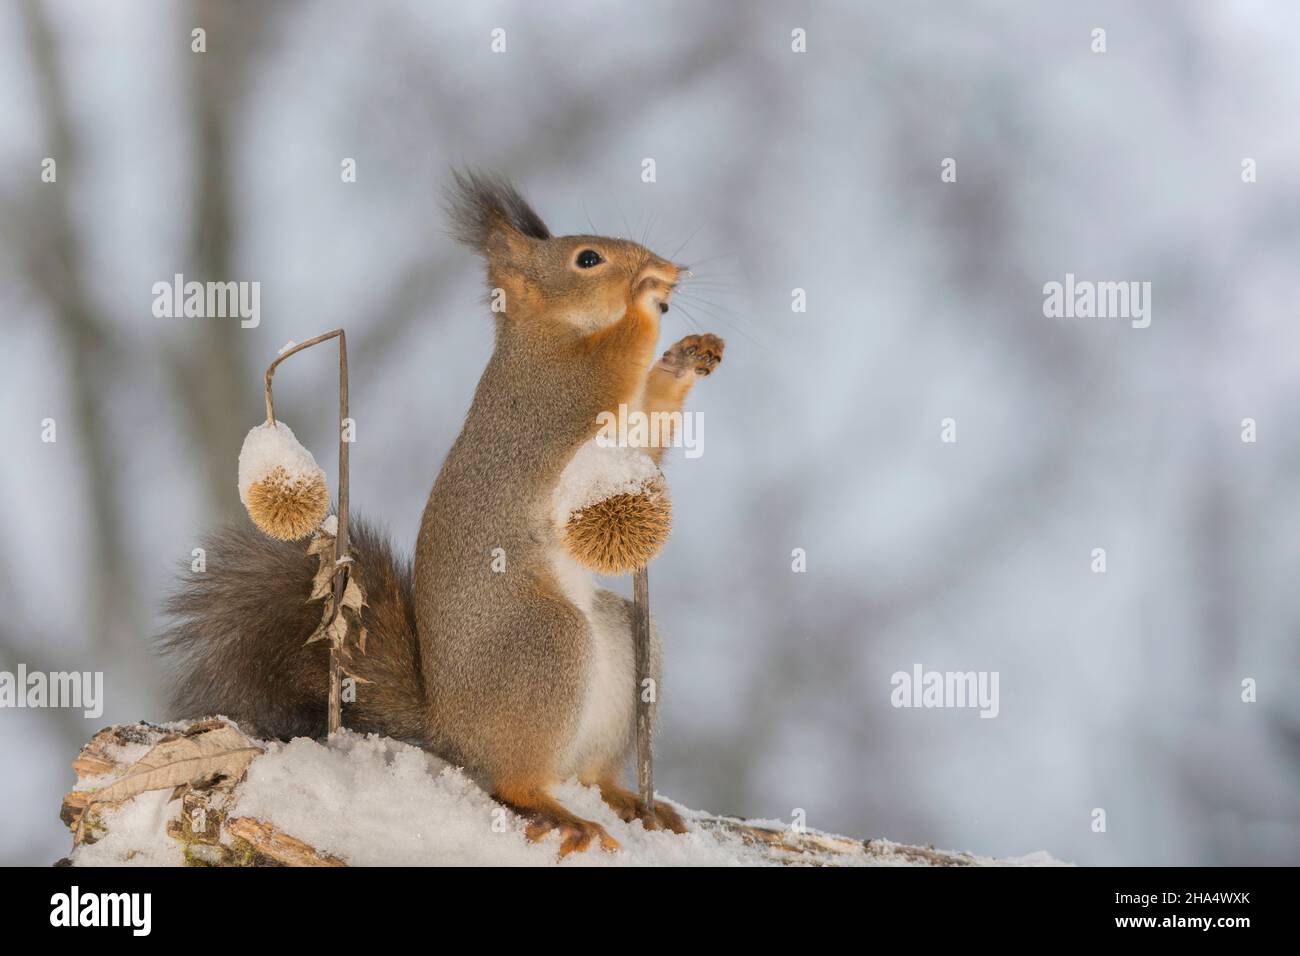 close up of red squirrel on snow touching a dried frozen thistle and looking and reaching up Stock Photo